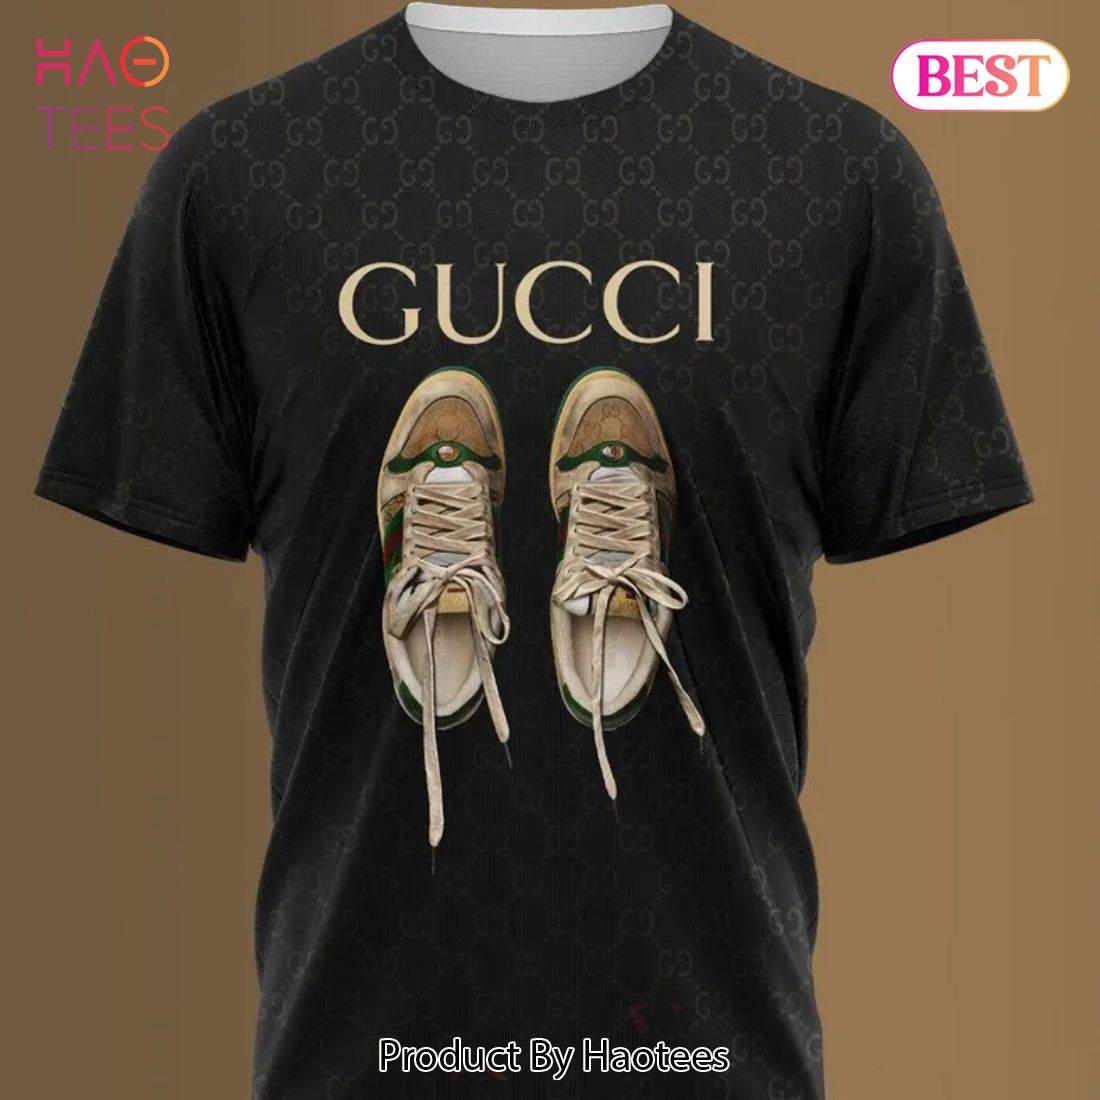 [NEW FASHION] Gucci Shoes Black Luxury Brand T-Shirt Outfit For Men Women